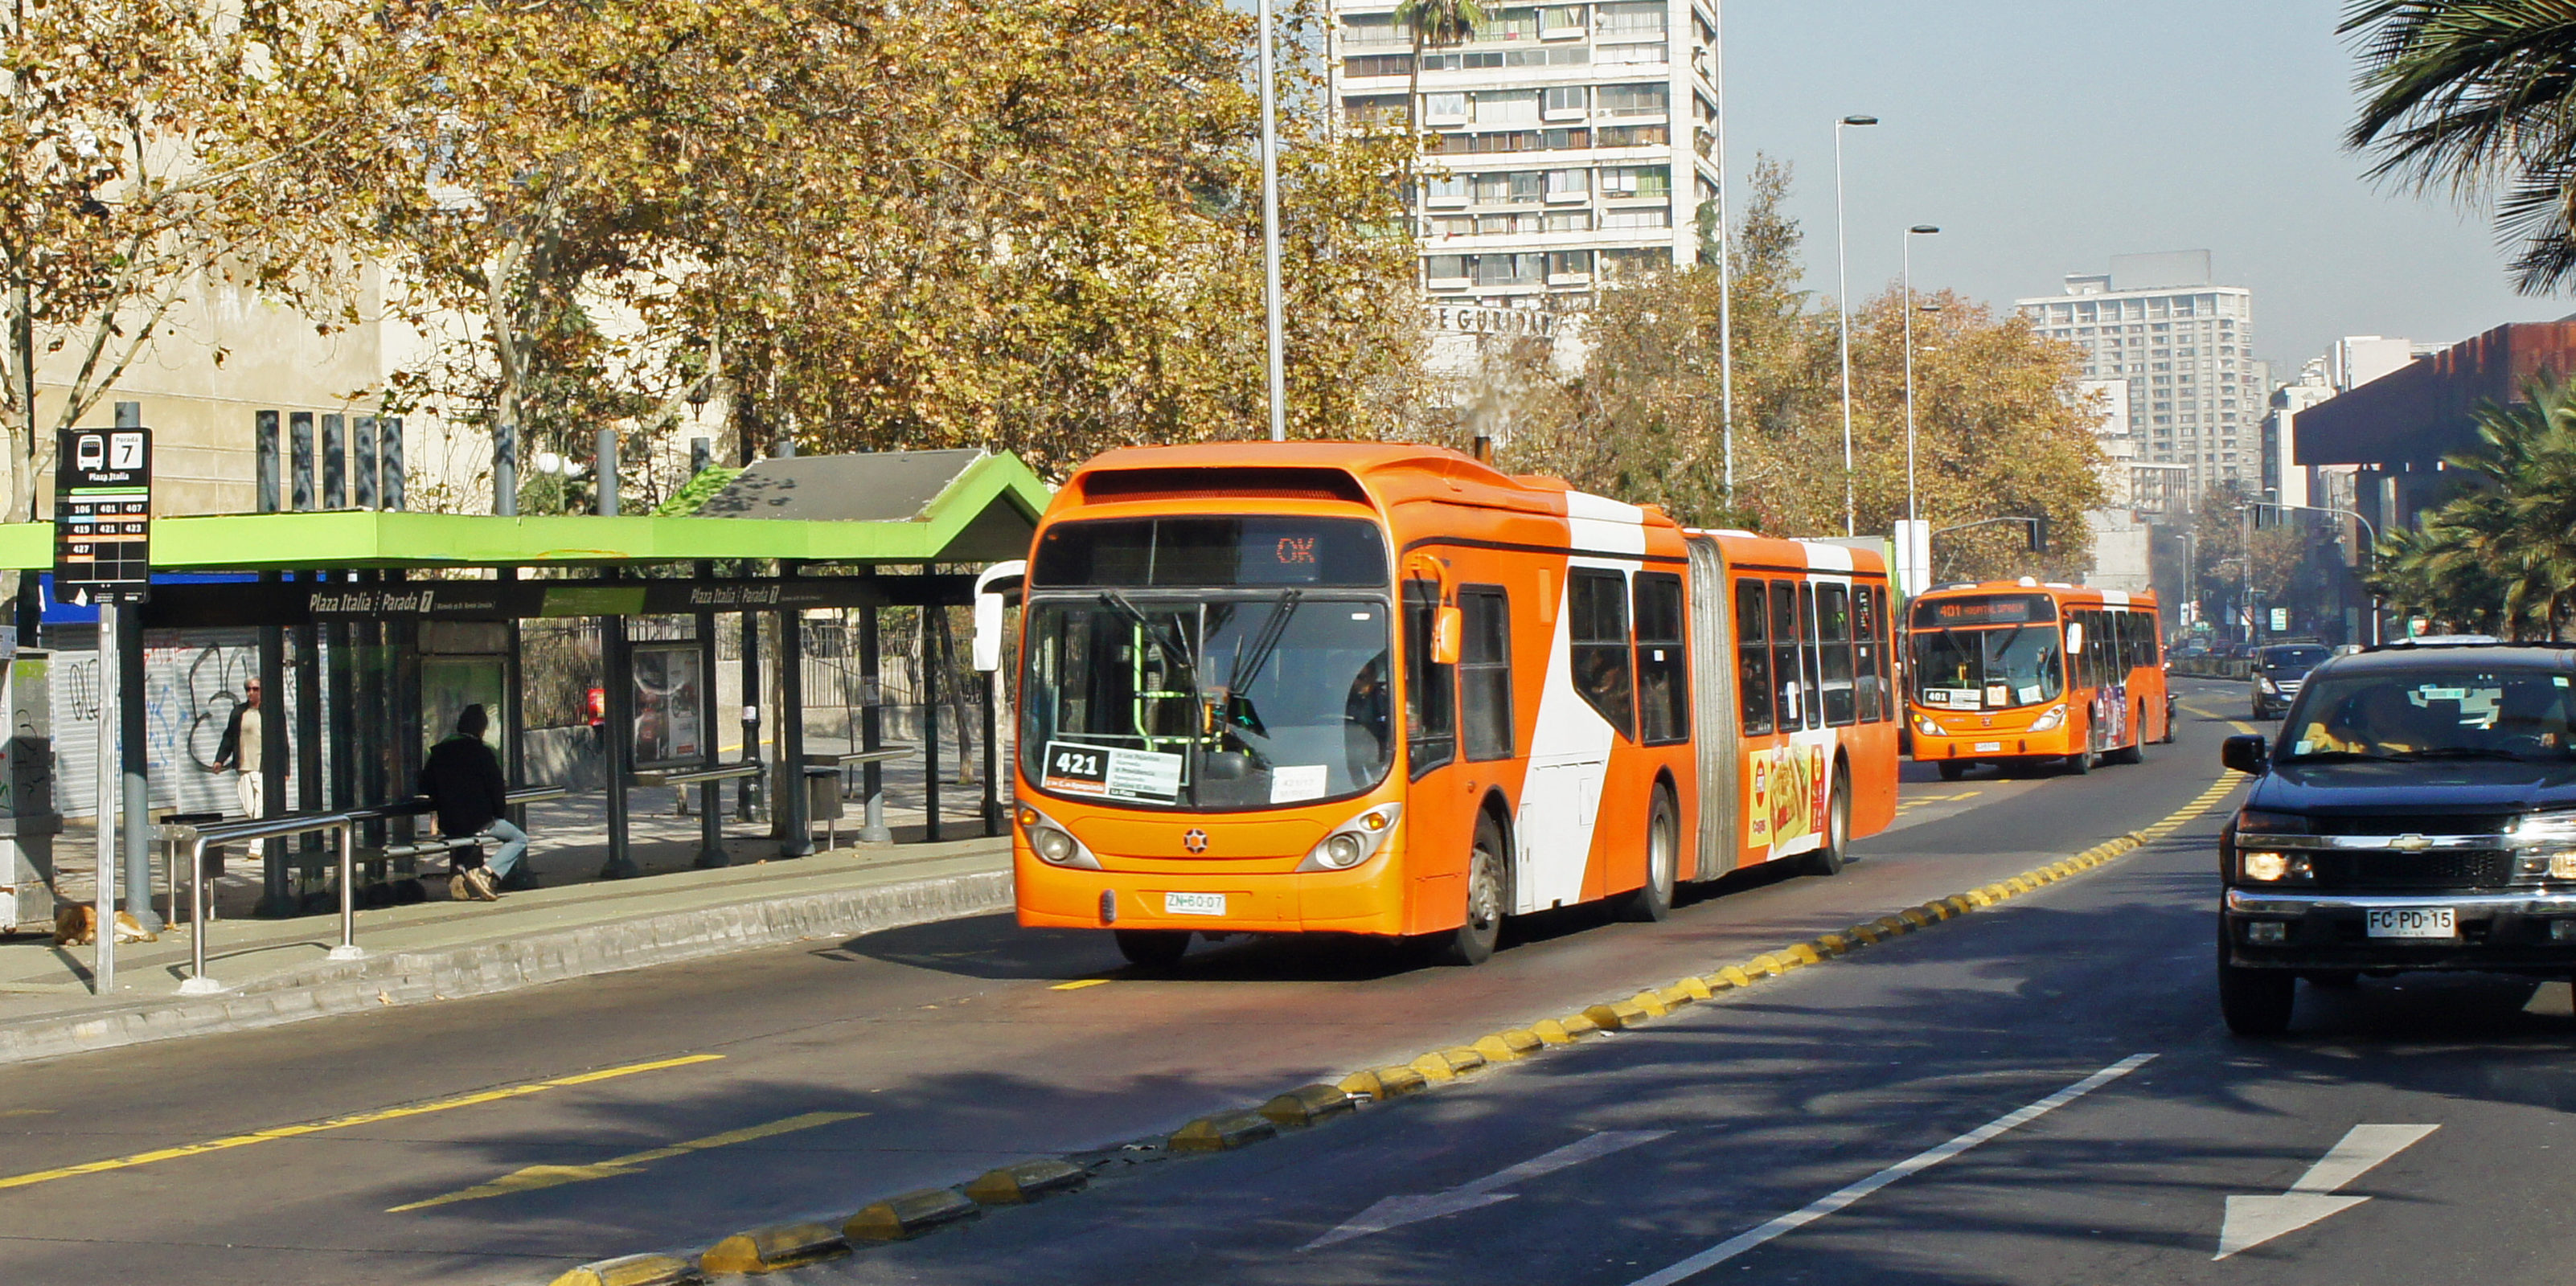 [WEBINAR] Technology to Improve BRT Reliability: Lessons and Challenges